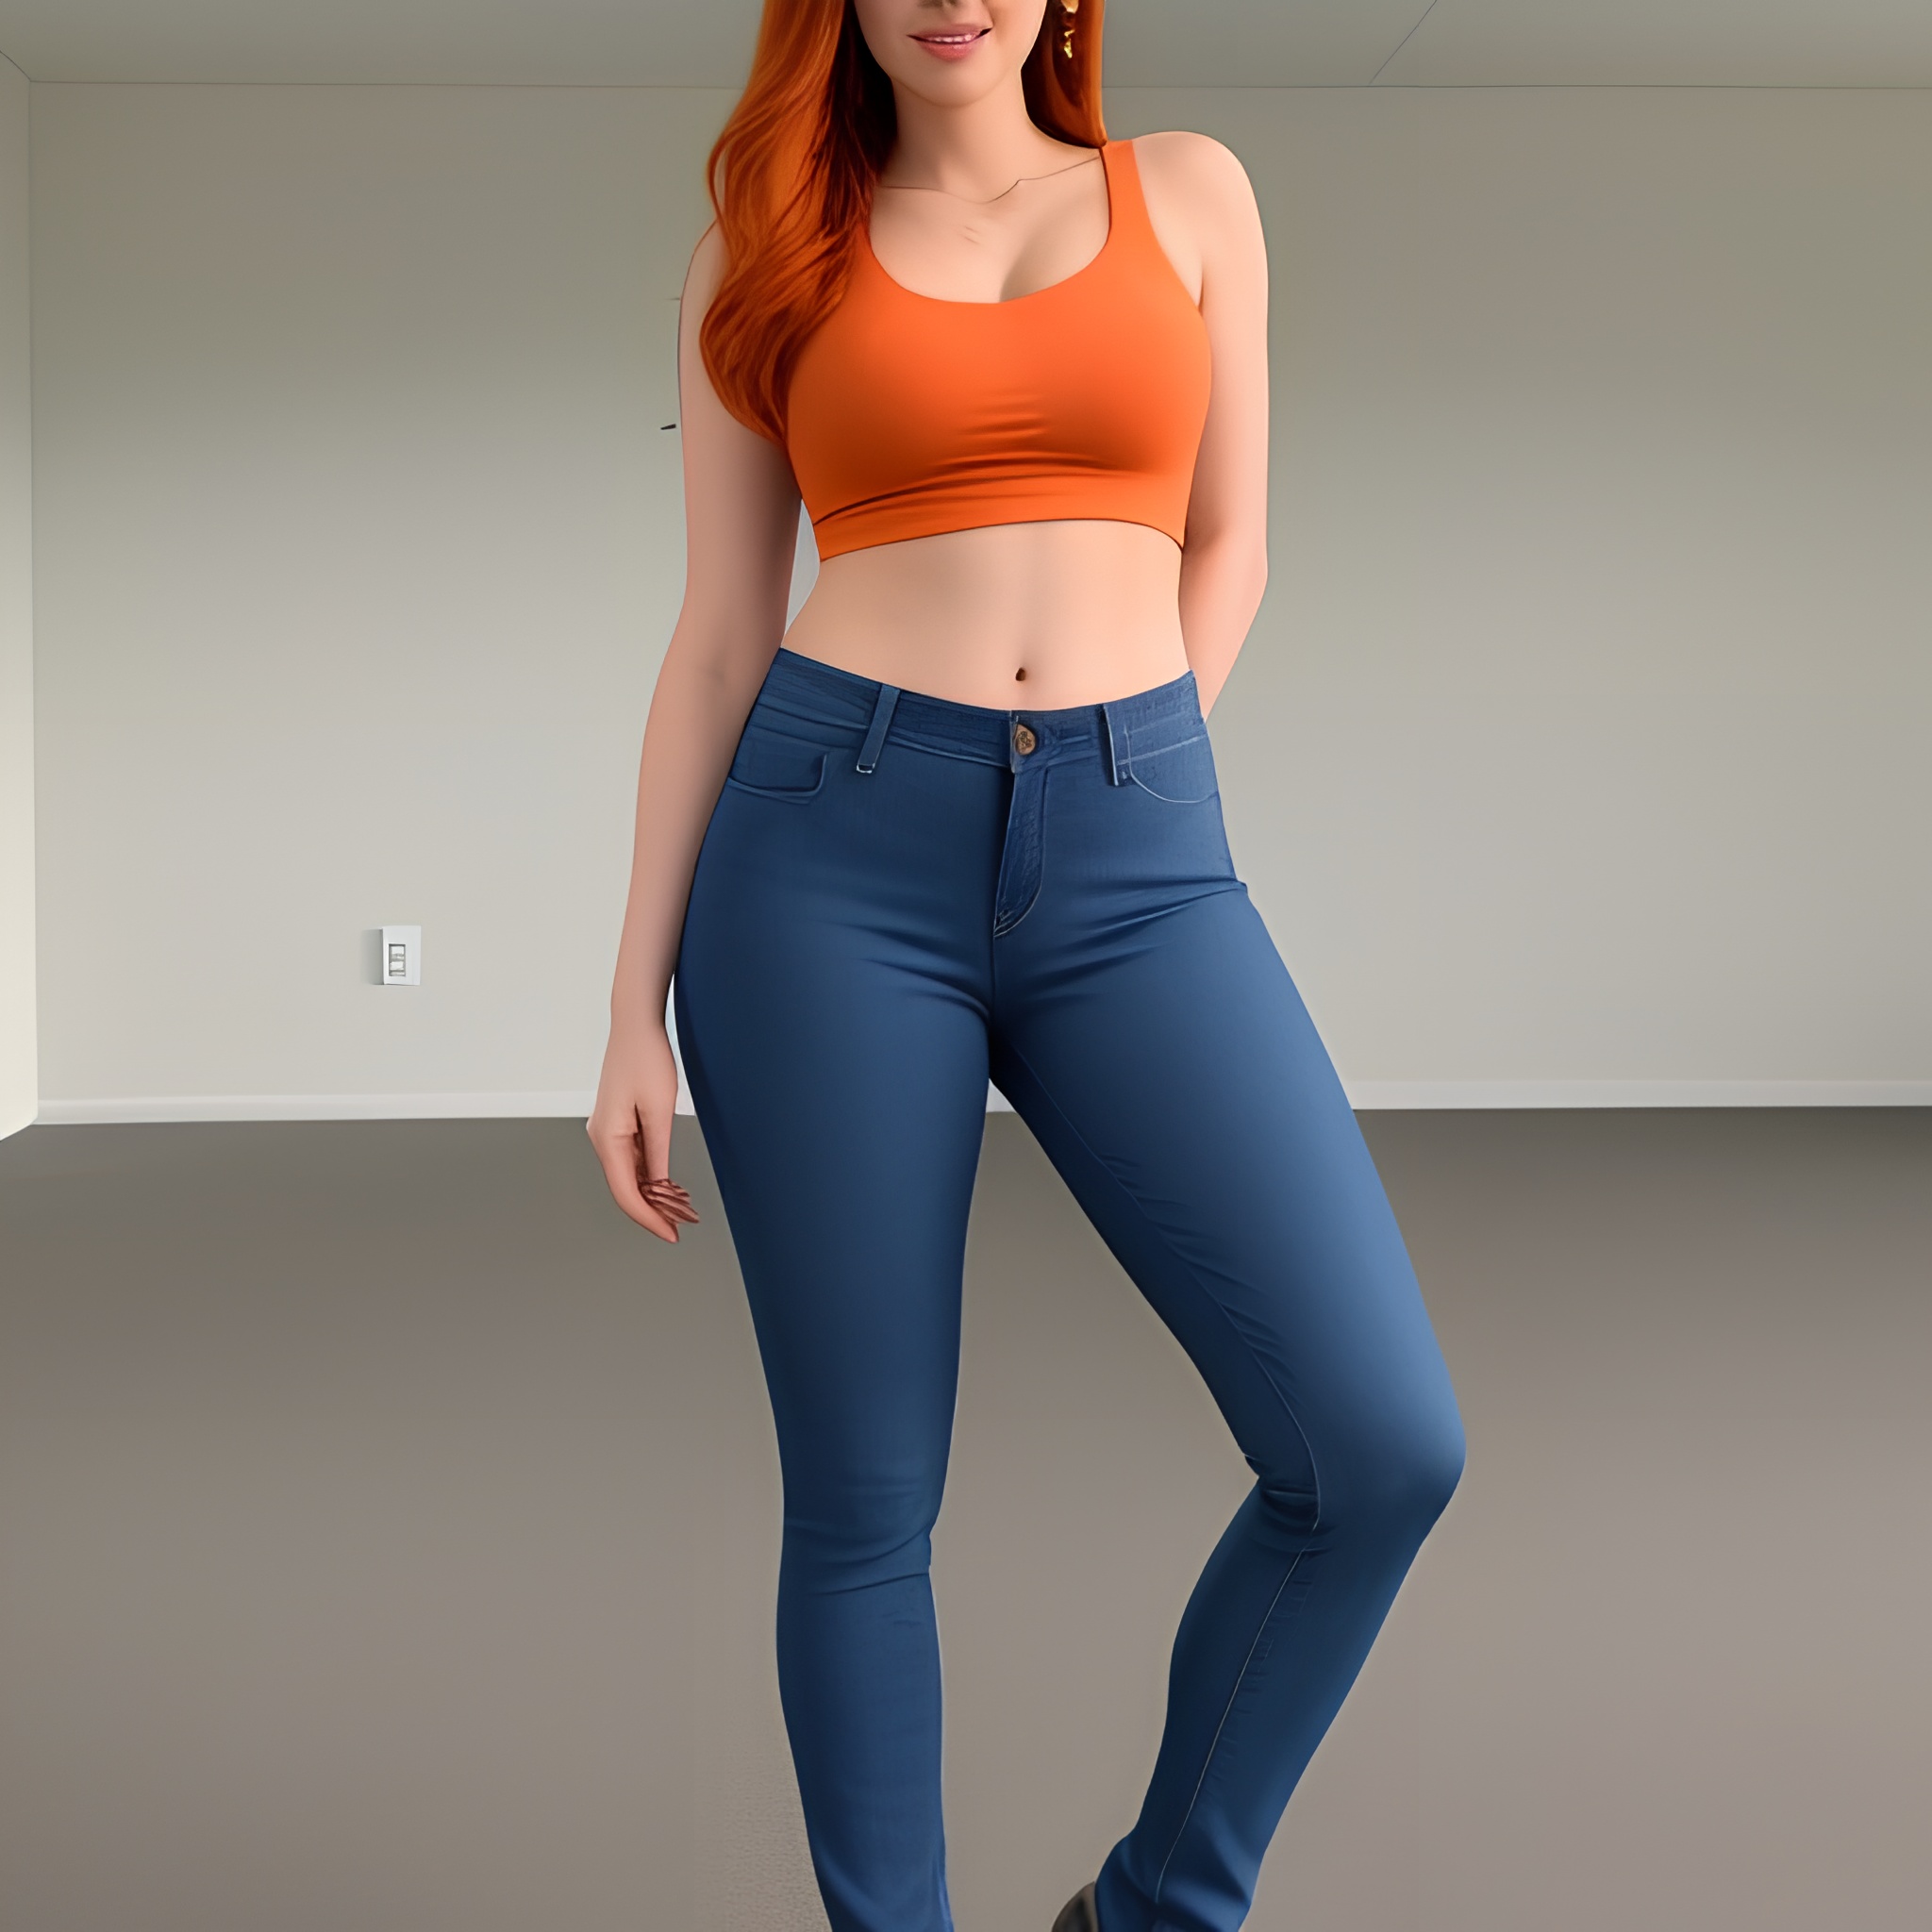 ginger sexy woman